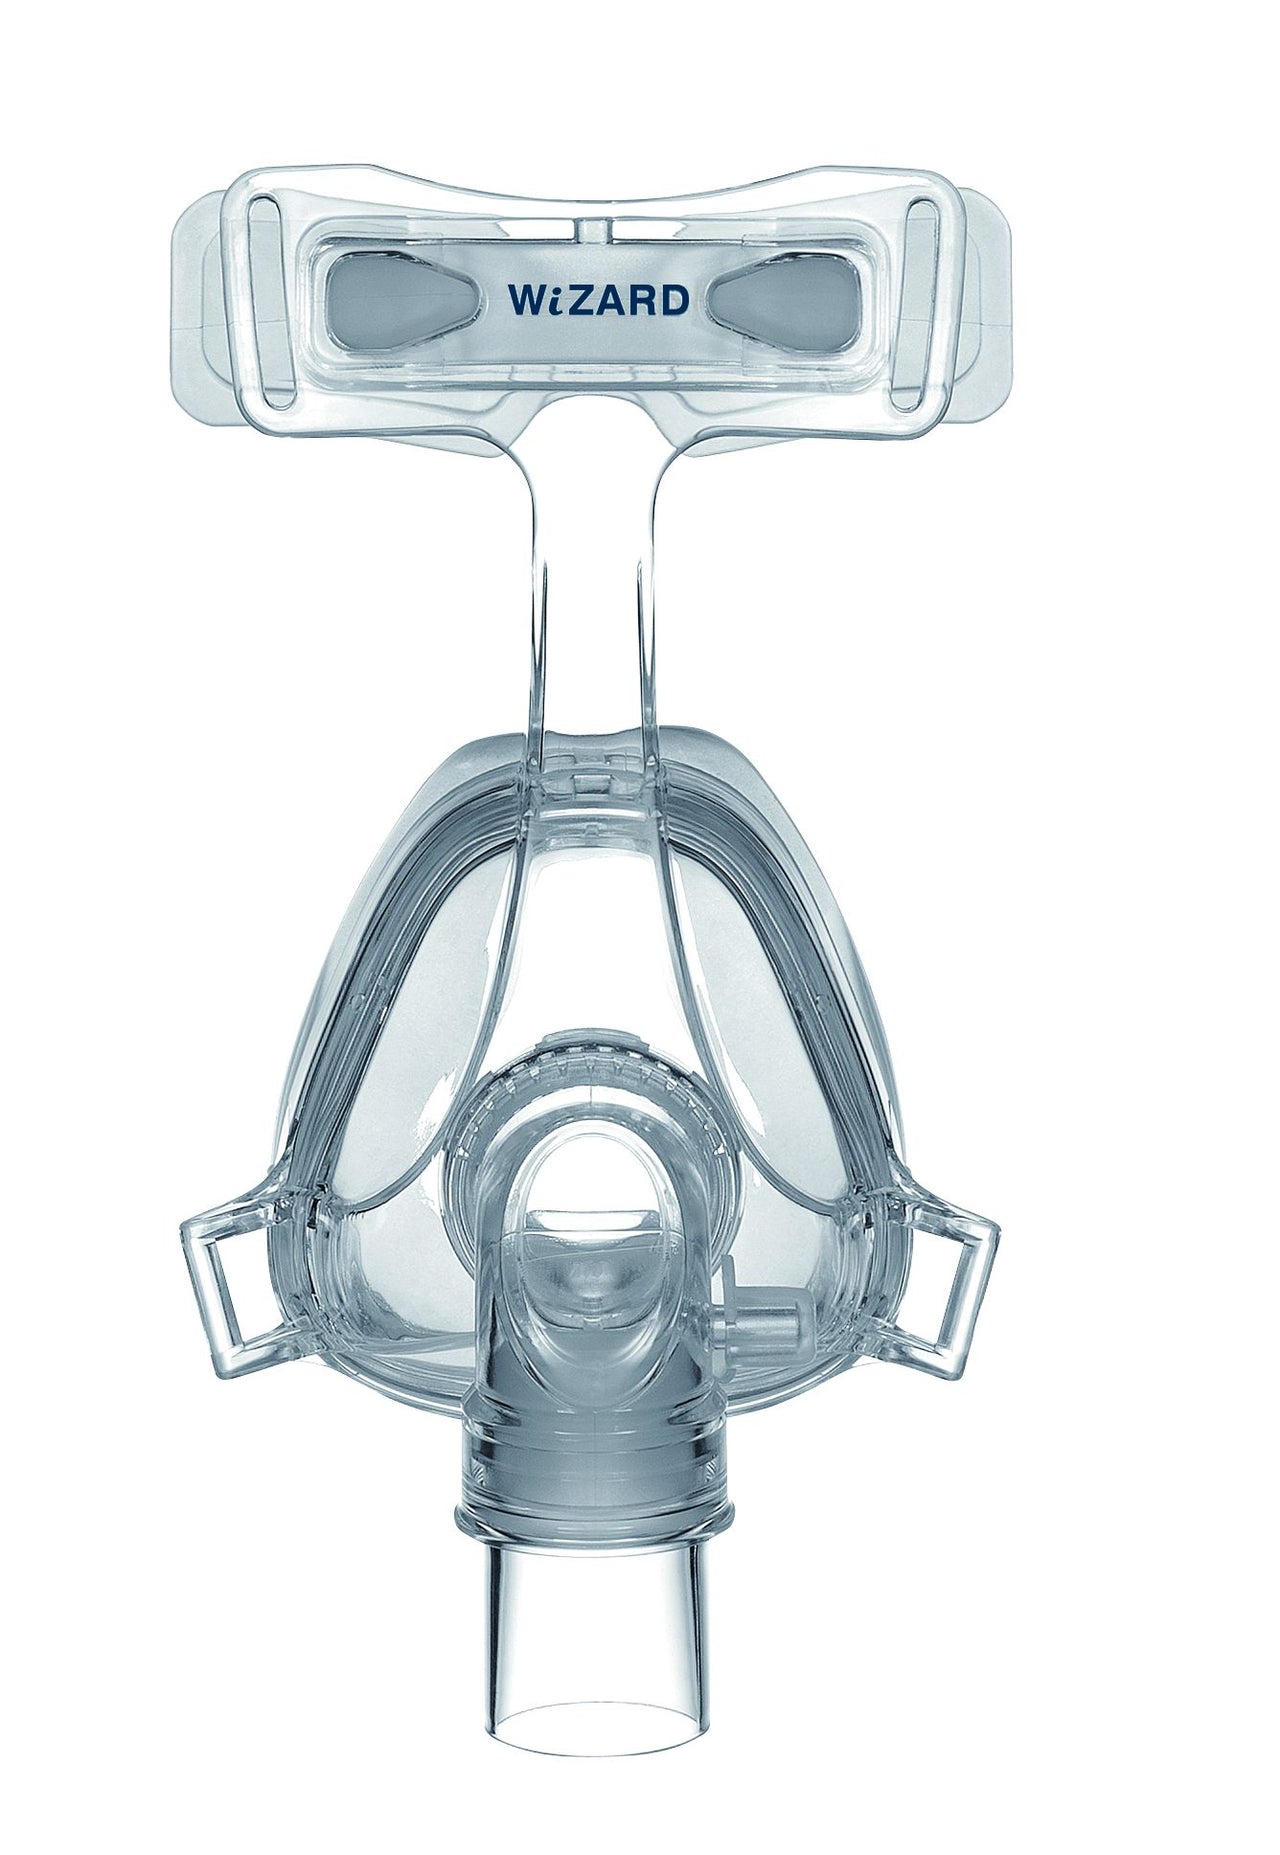 CPAP Masks, Hoses, & Accessories